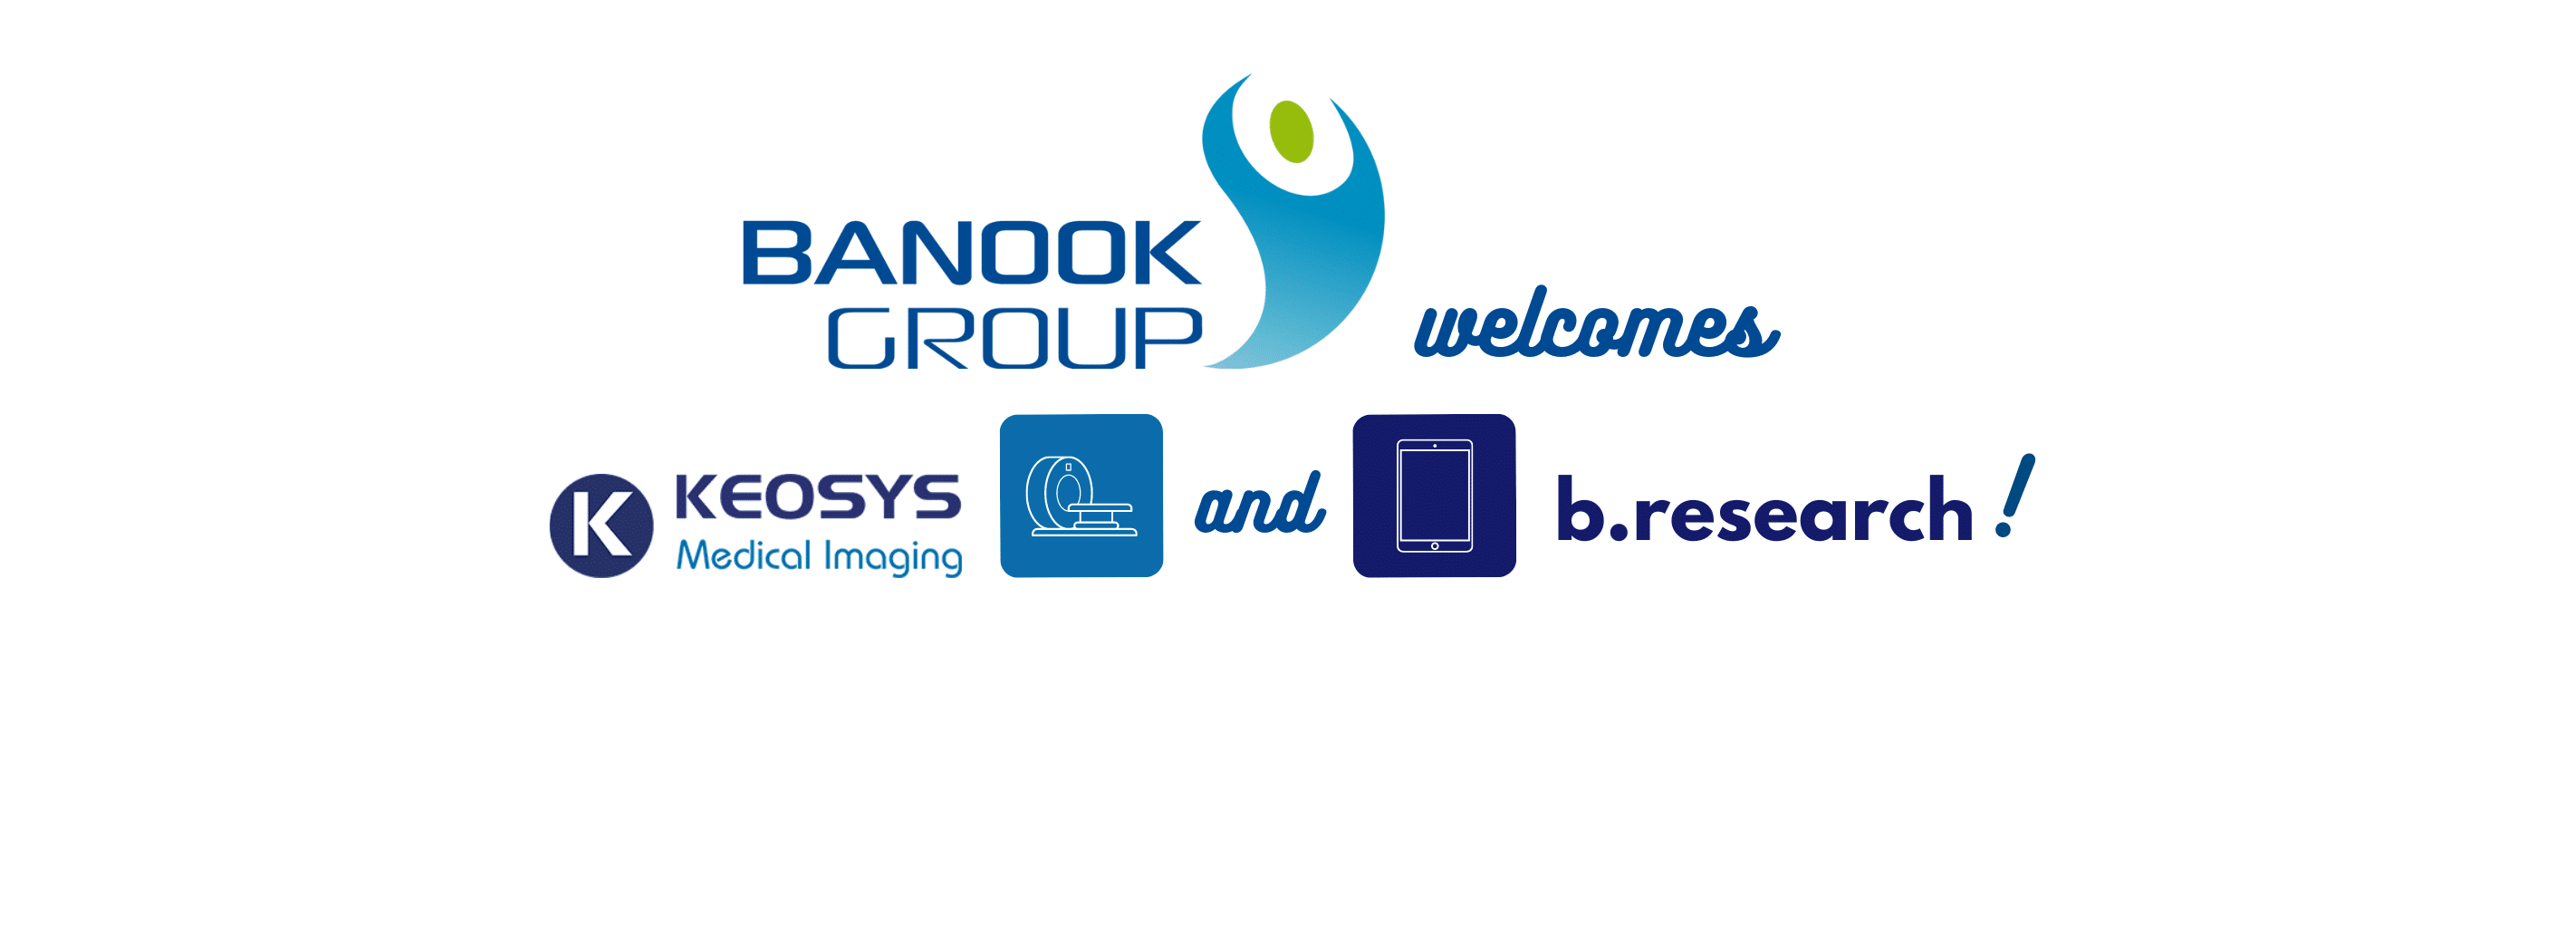 Banook welcomes Keosys and b.research